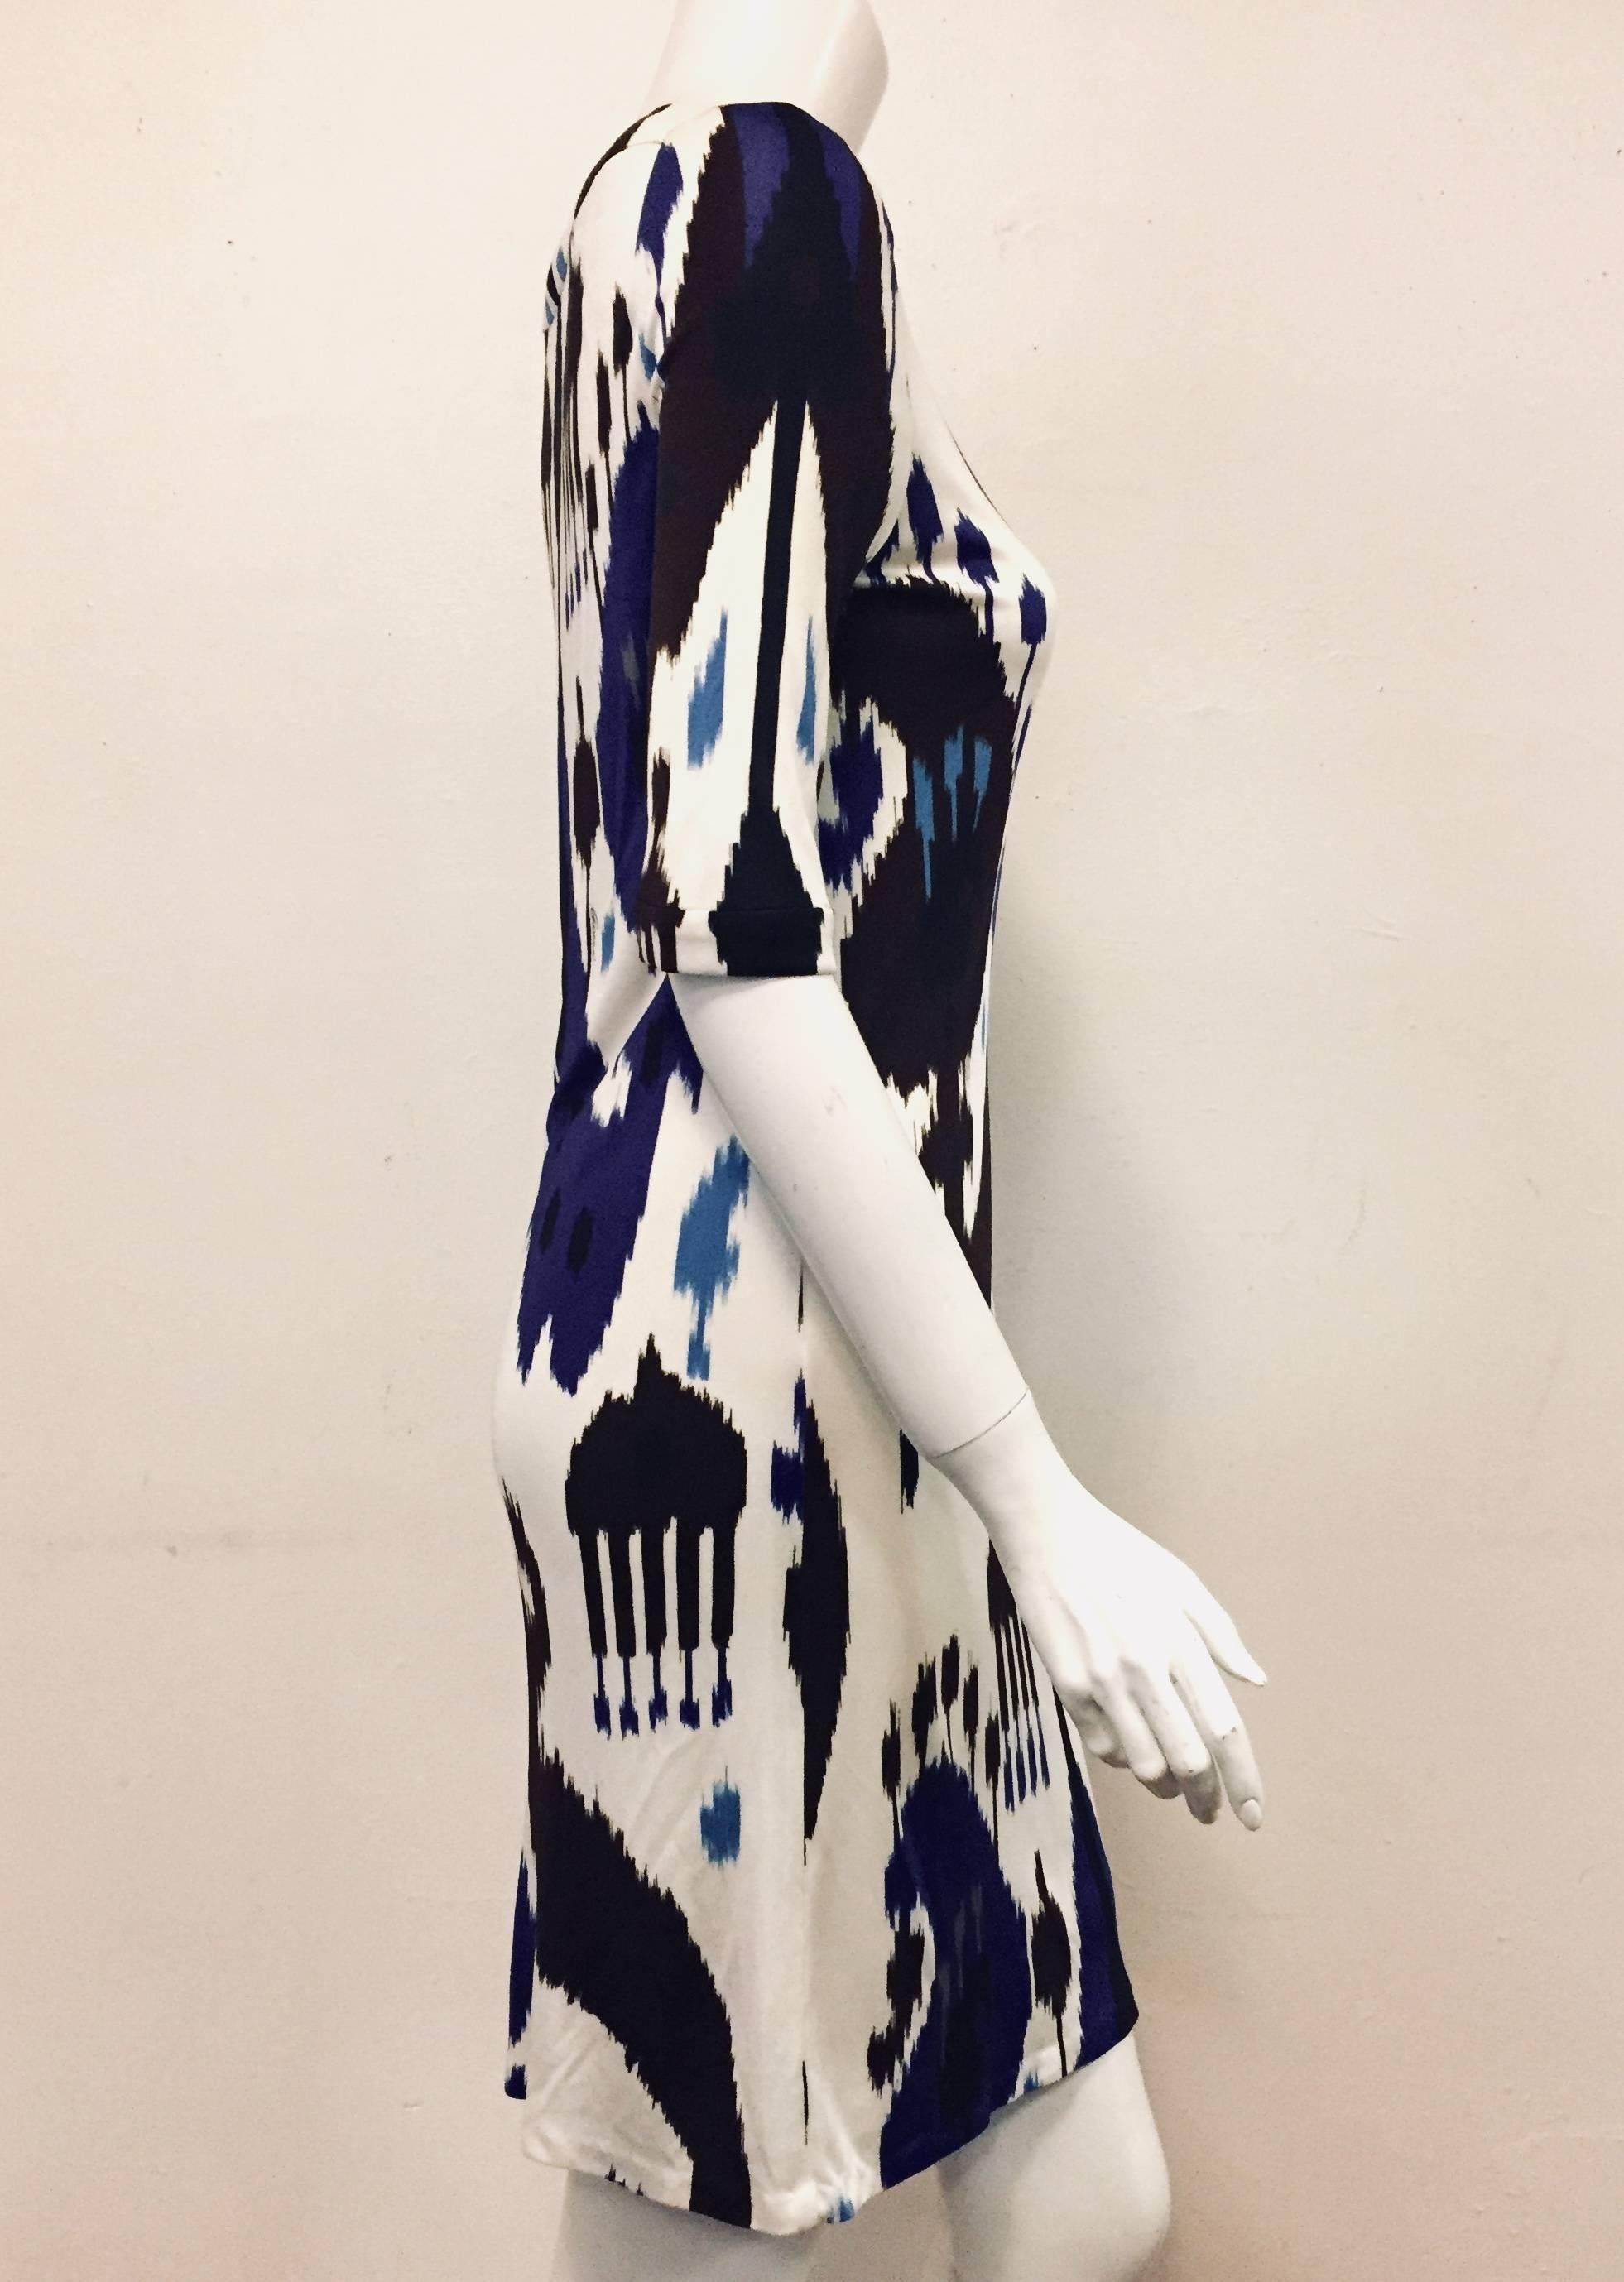 Gucci silk Ikat tribal print dress in blue, white and black is outstanding!  Ikat is currently one of the favorite fabric styles because each varies so greatly.  Steeped in Indian influences, the Ikat was originally specified for royal families. 